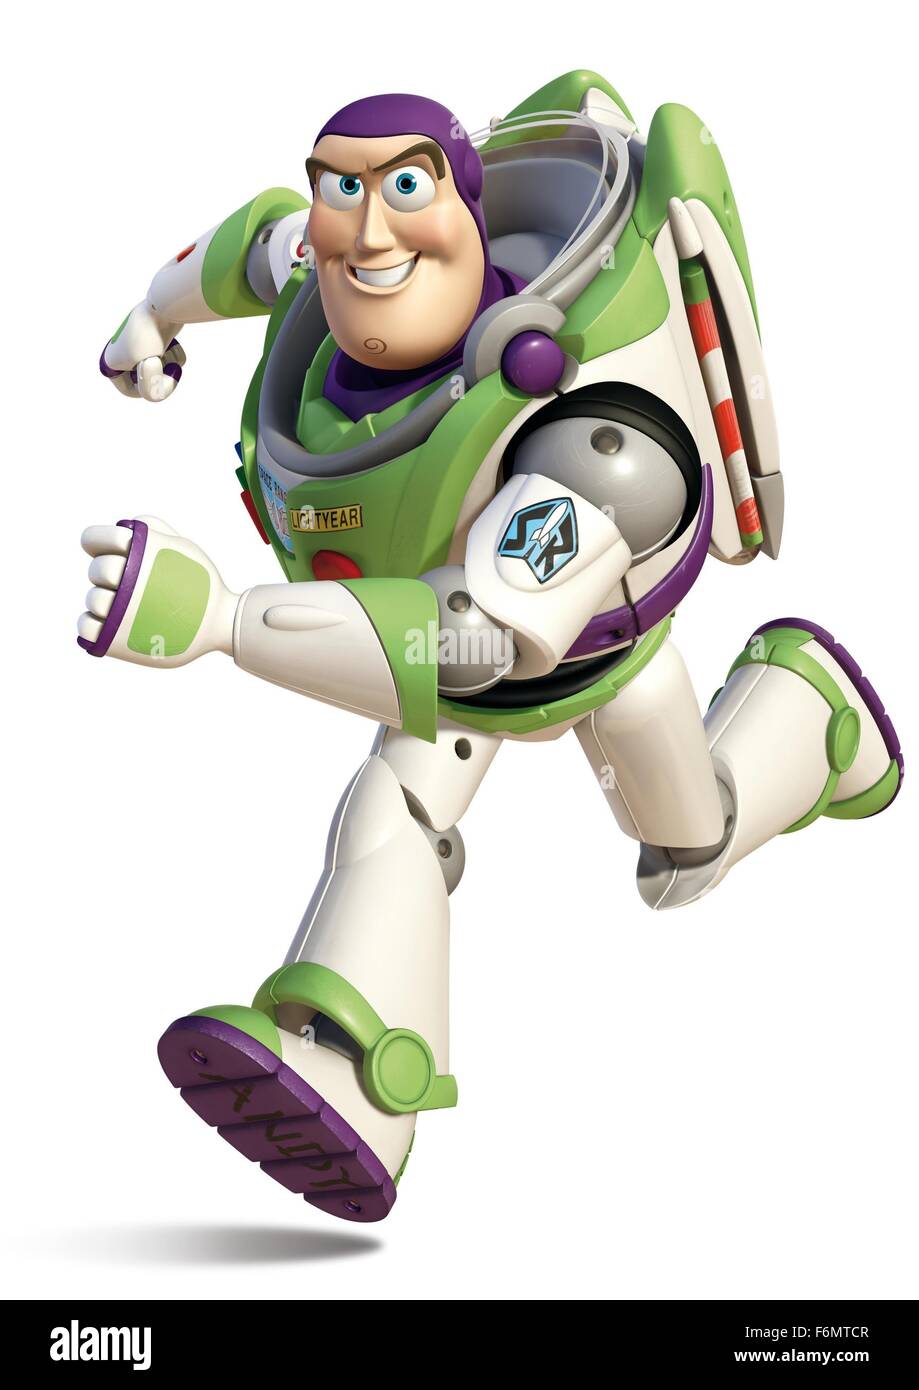 RELEASE DATE: June 18, 2010   MOVIE TITLE: Toy Story 3   STUDIO: Disney Pixar   DIRECTOR: Lee Unkrich   PLOT: Woody, Buzz, and the rest of their toy-box friends are dumped in a day-care center after their owner, Andy, departs for college   PICTURED: Buzz Lightyear   (Credit Image: c Disney Pixar/Entertainment Pictures) Stock Photo